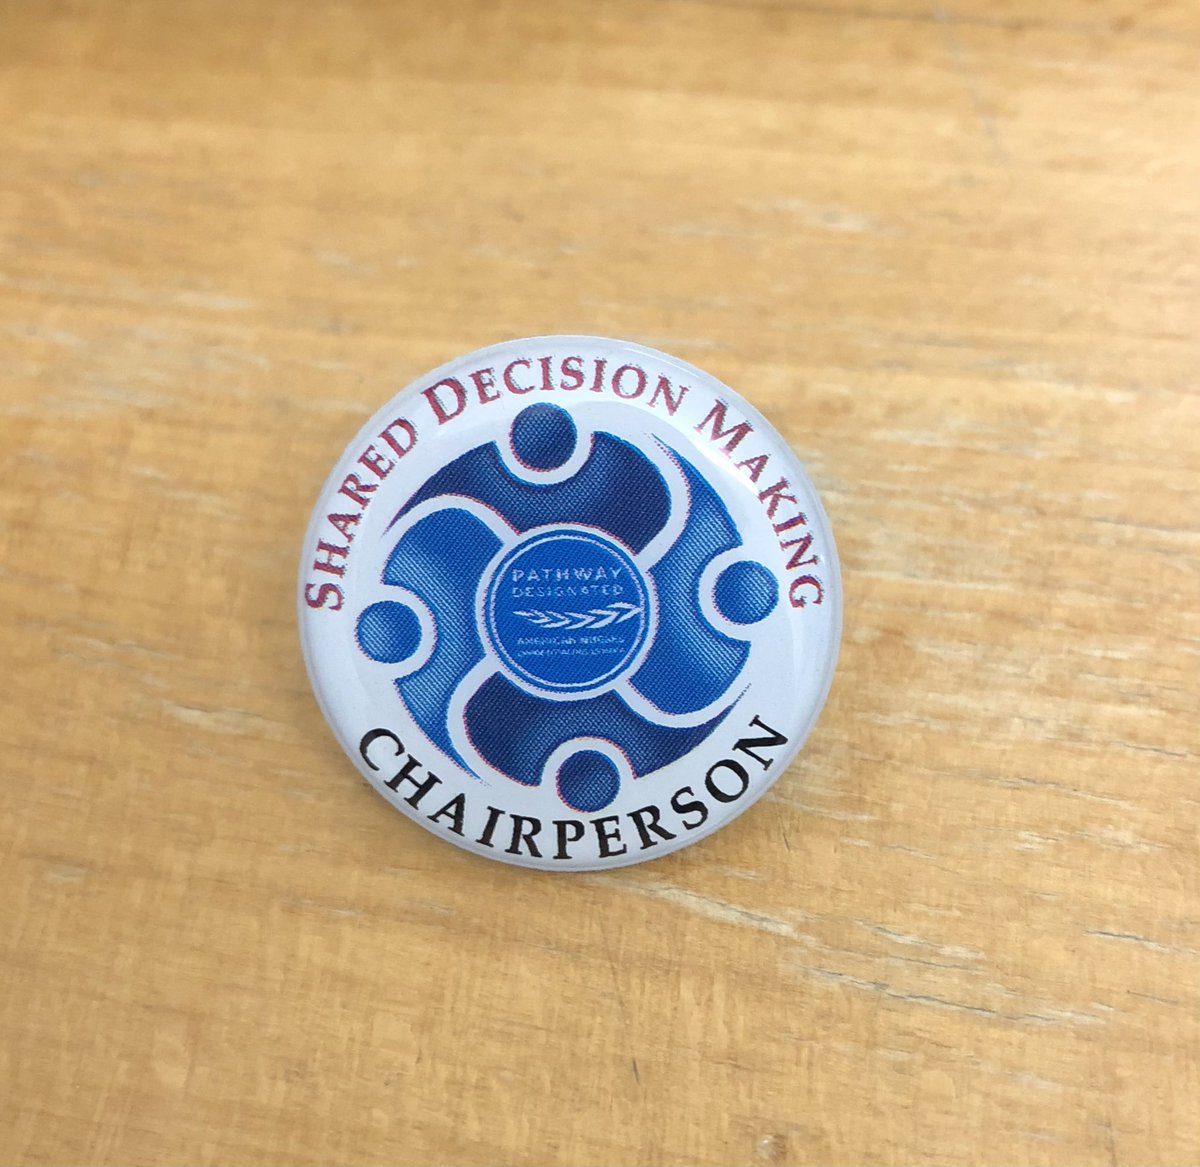 Our first shared decision making council chairperson badges have been given out today! #PathwaytoExcellence